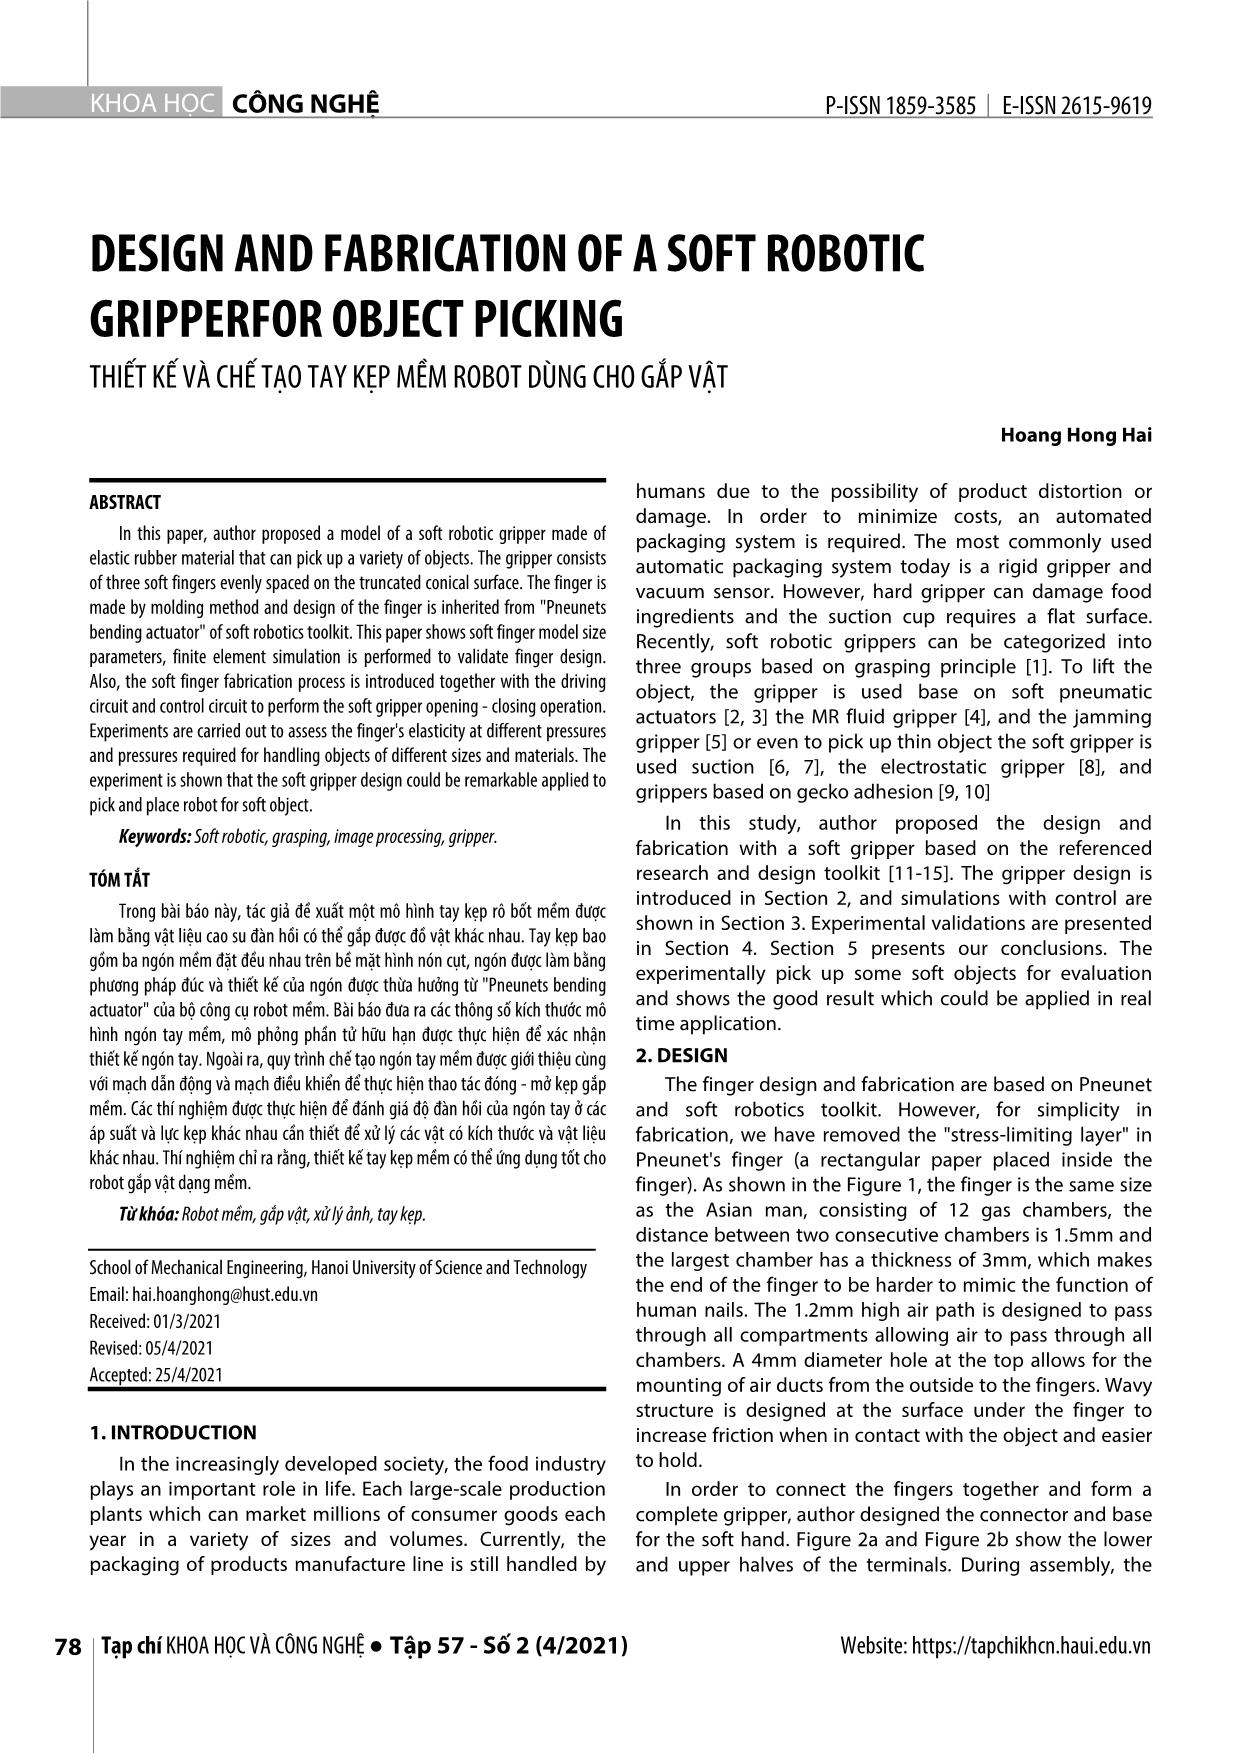 Design and fabrication of a soft robotic gripperfor object picking trang 1